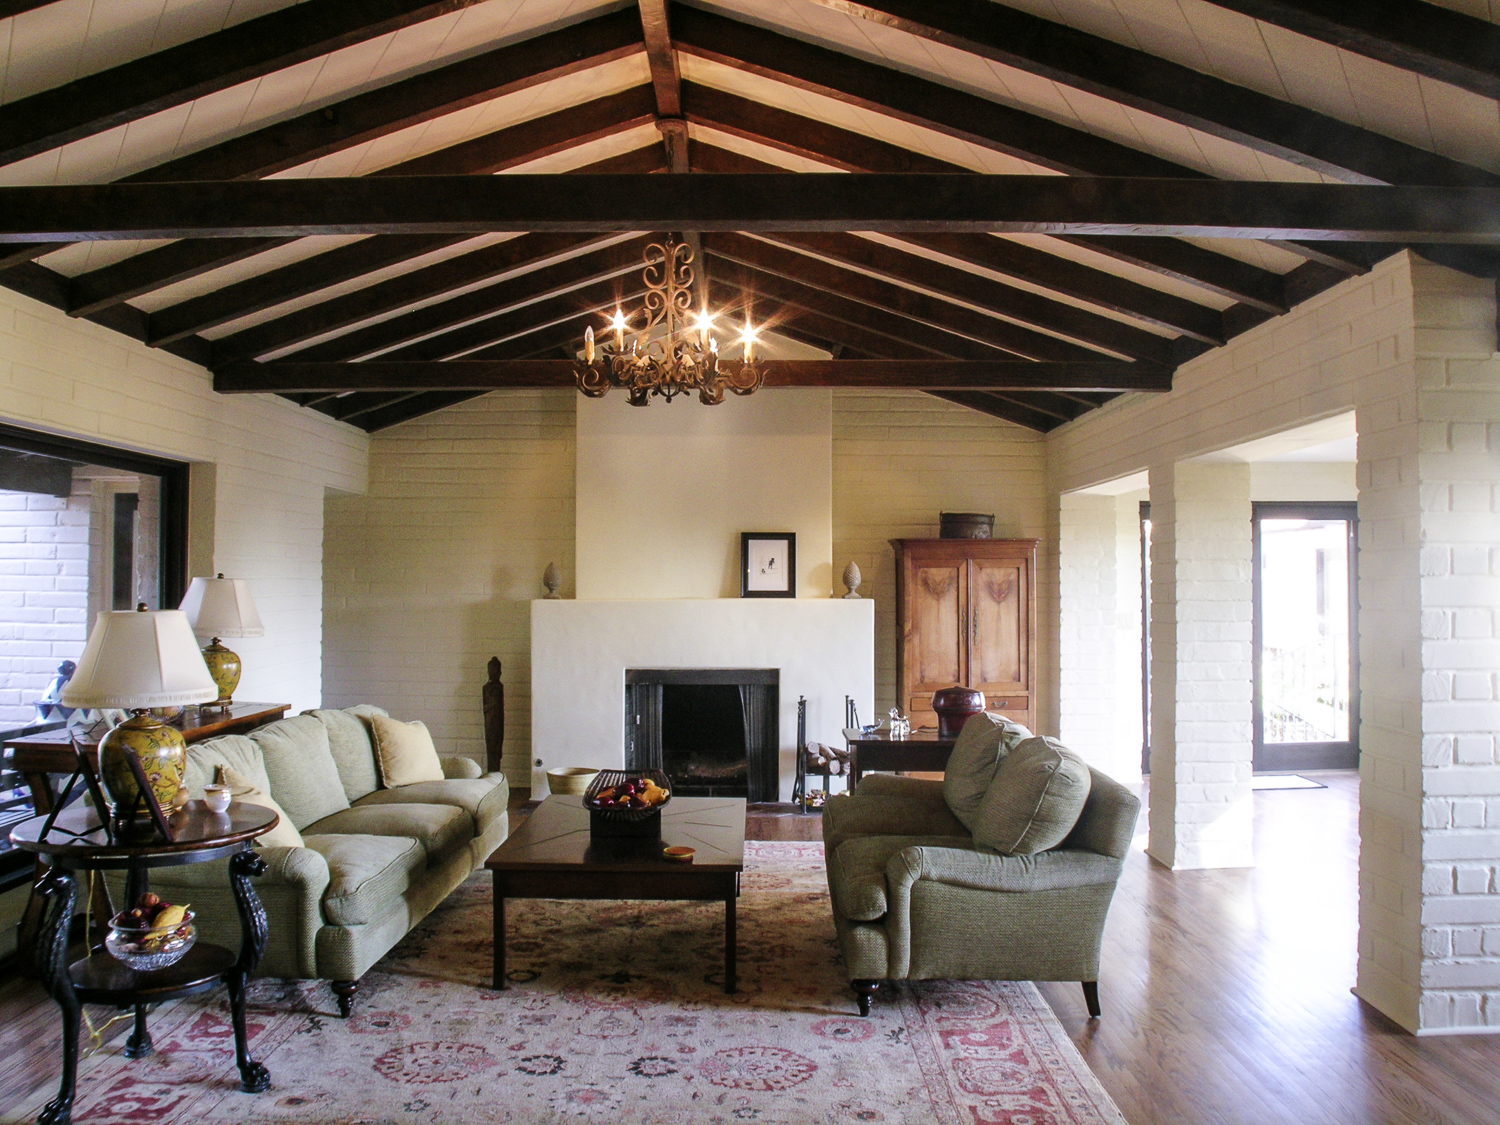 Nott & Associates remodel of craftsman living room. Project includes new supporting beams and renovated interior.